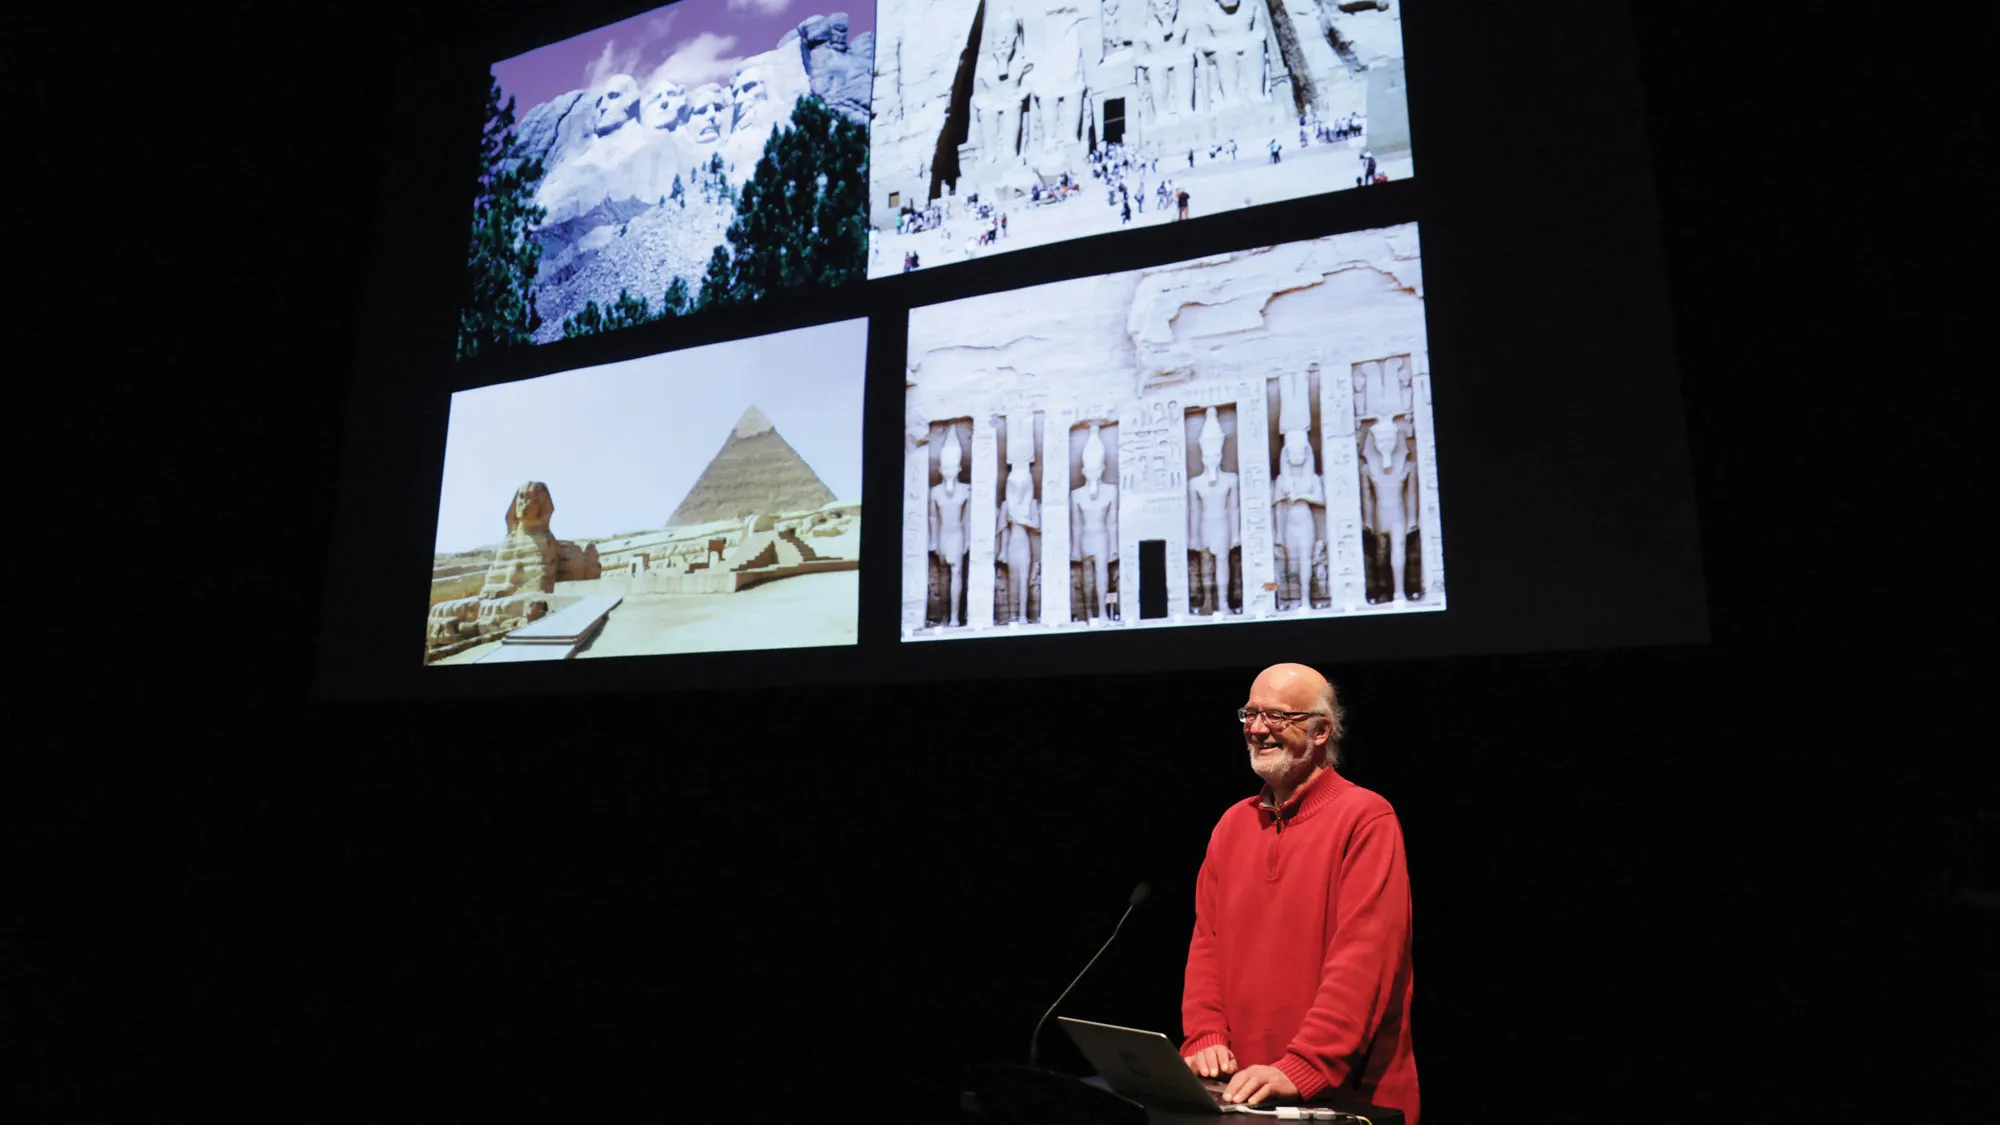 Johannes Goebel giving his talk on the Theater stage in front of a large screen displaying images of Mount Rushmore, The Sphinx, and other Egyptian monuments. 